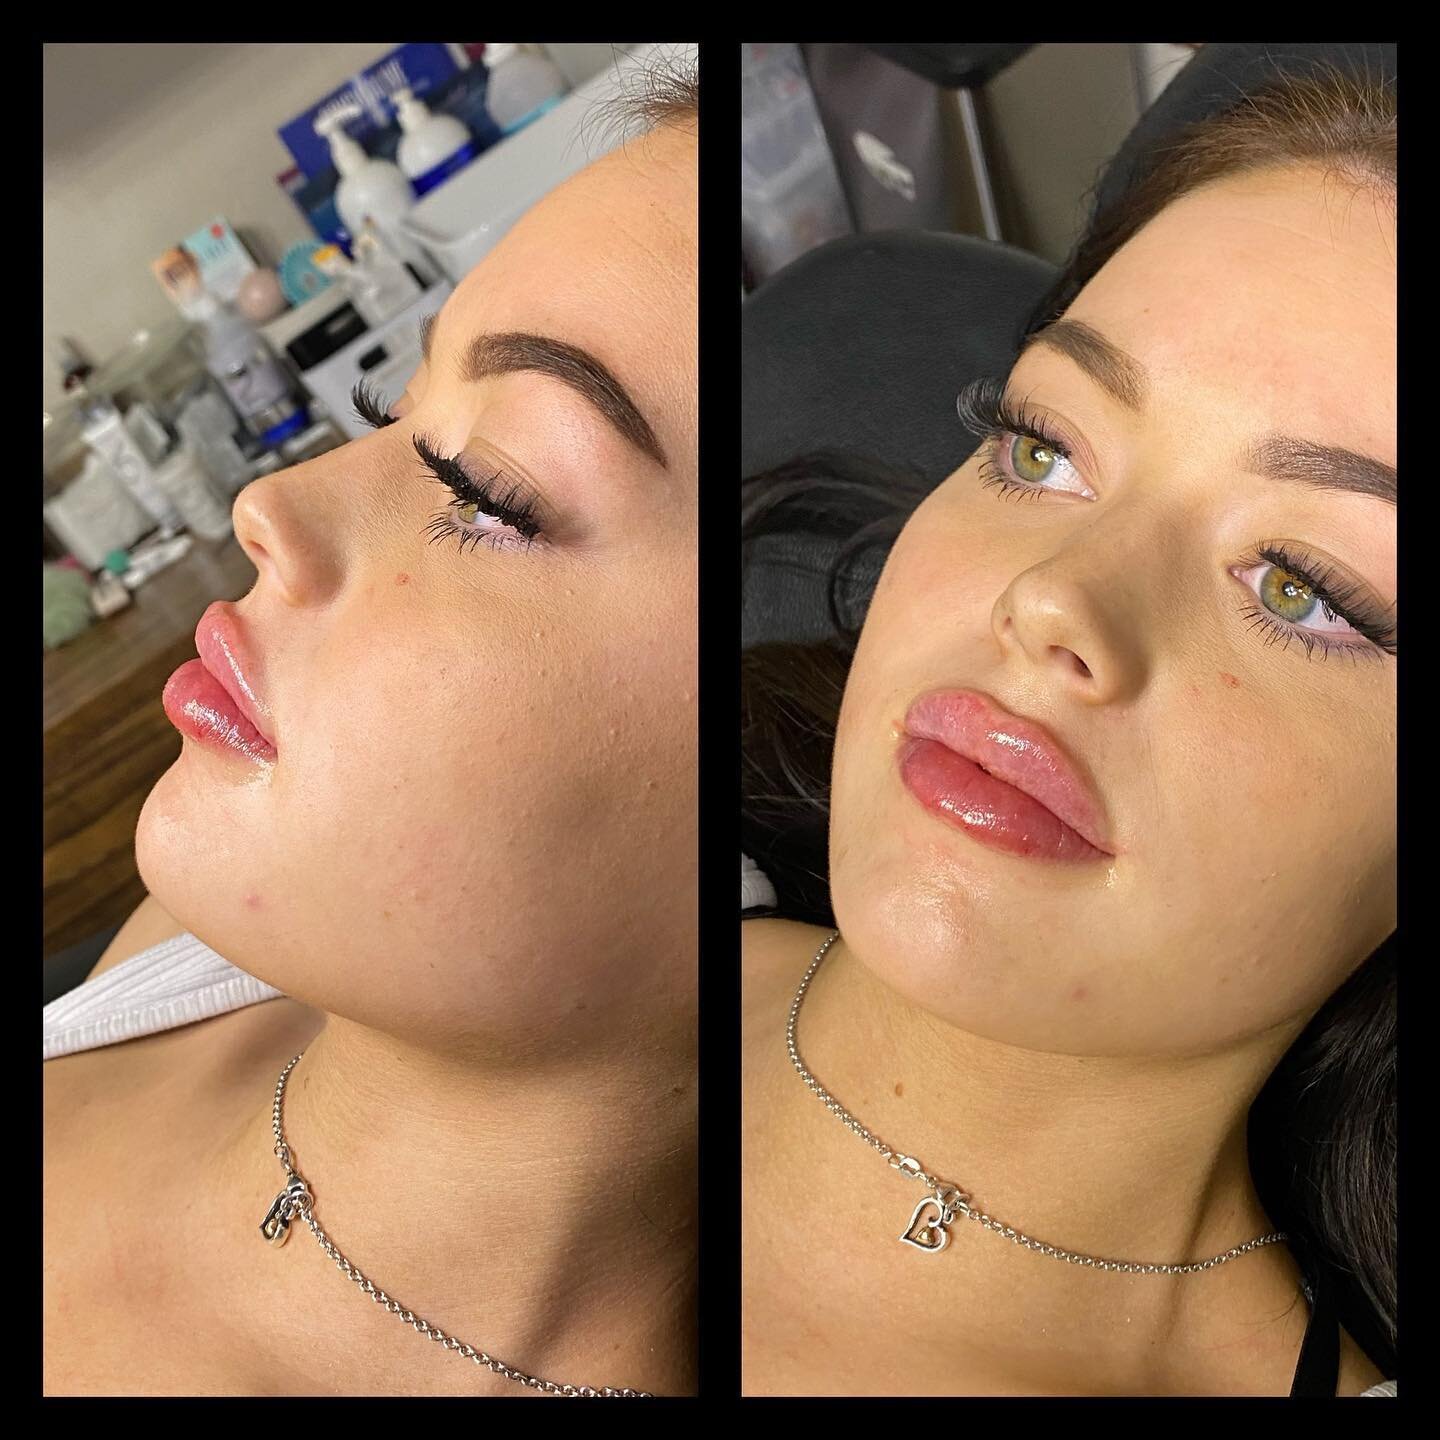 Gorgeous lip 💋 enhancement with @revanesseusa Versa! 
📝pictures taken immediately following injections. Swelling will subside in 1-2 weeks. 
#versa #lipfiller #lipenhancement #mansfieldbotox #mansfieldtx #mansfieldmedspa #mansfieldlipfiller